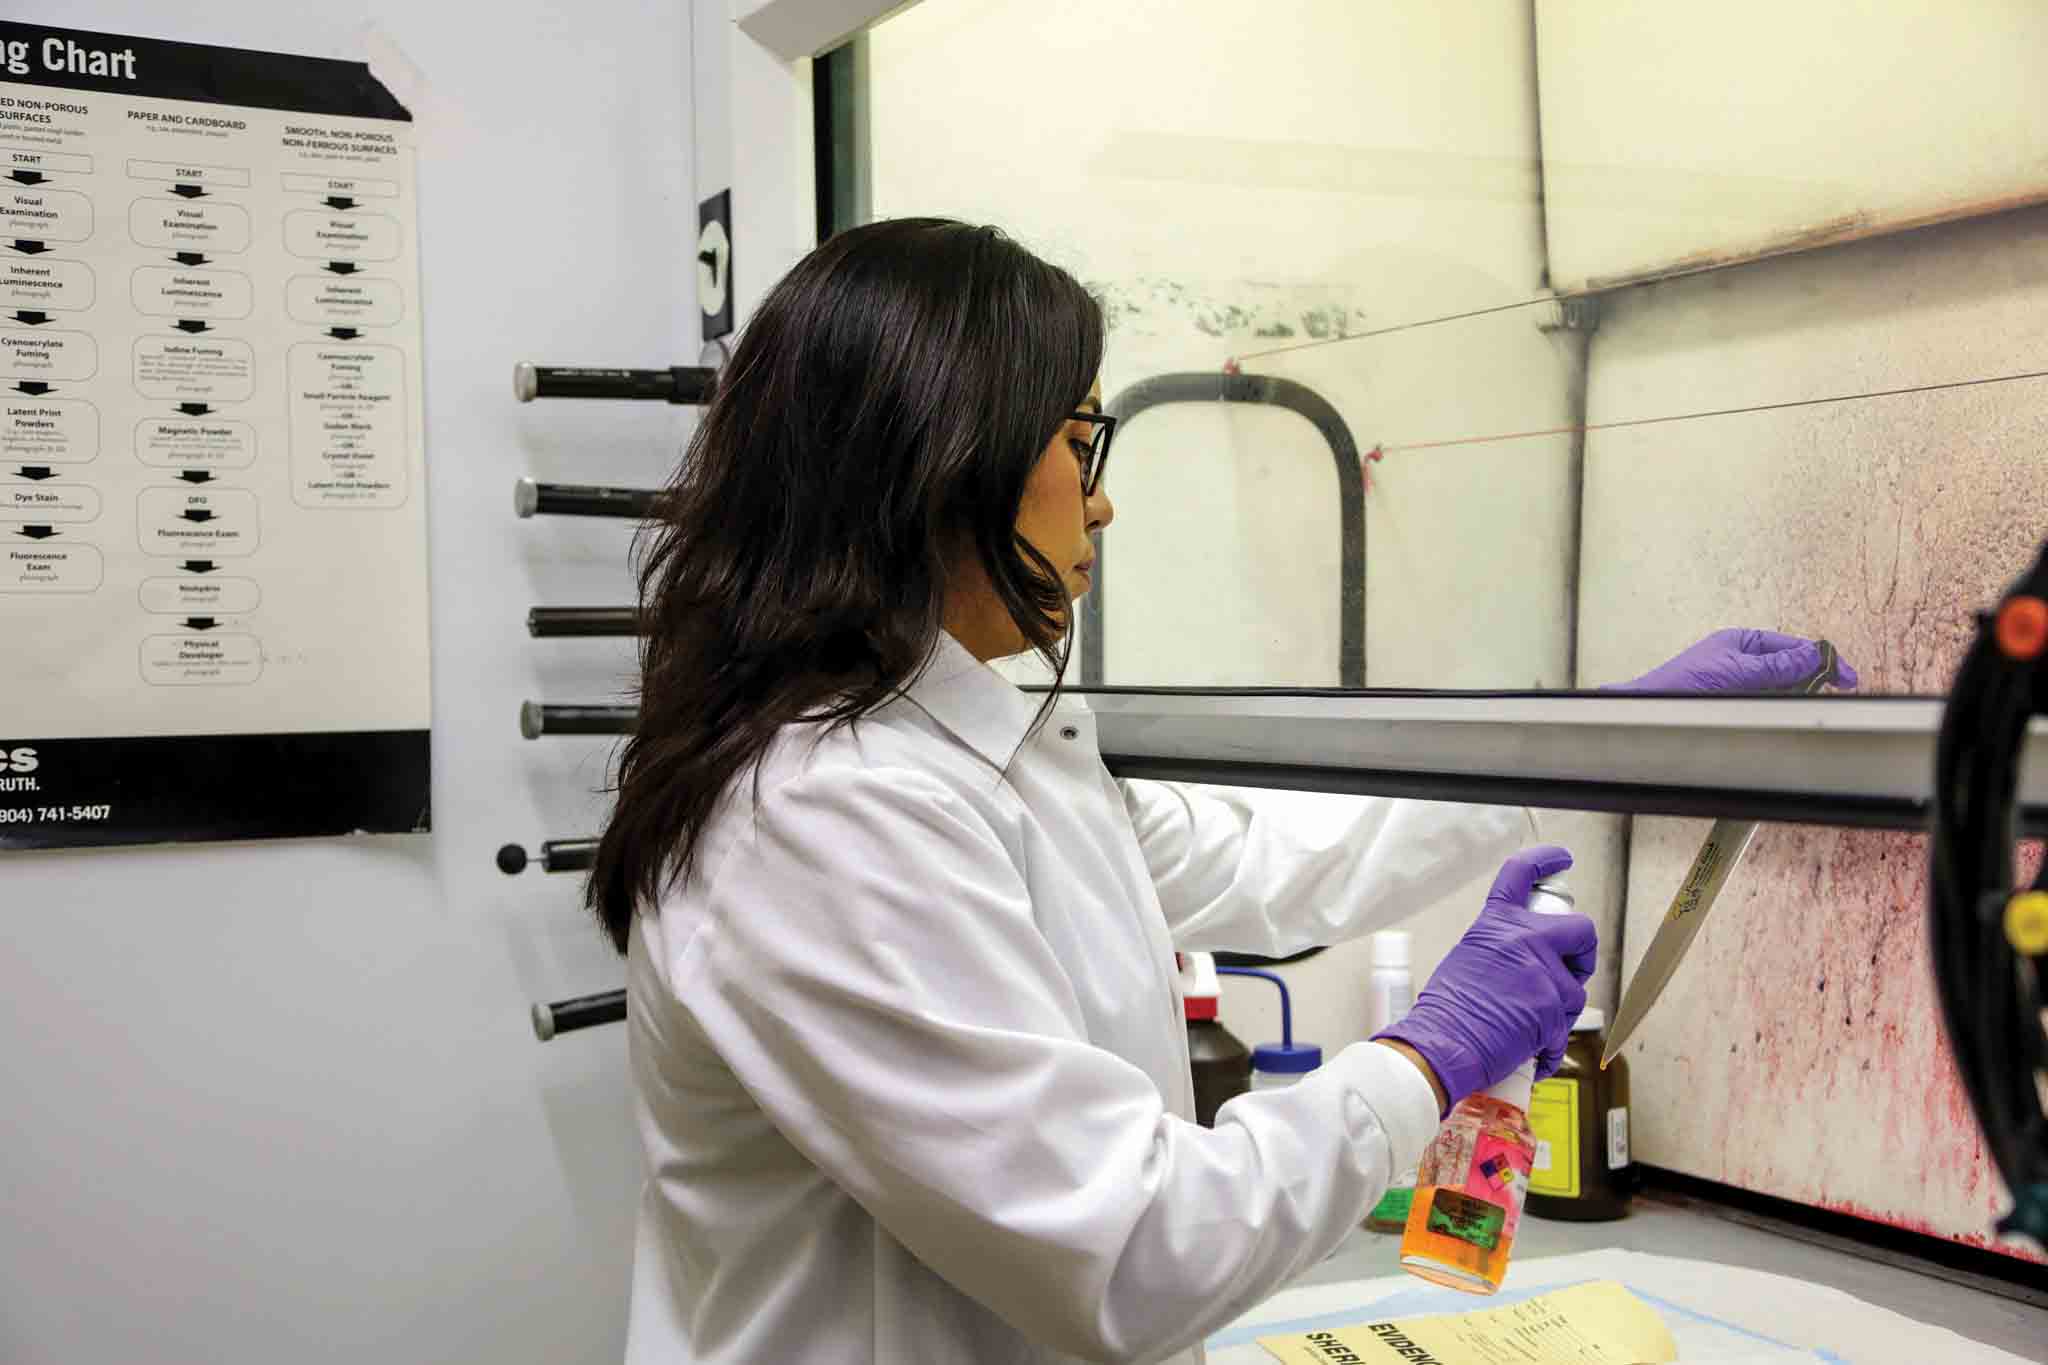 Dennise Hernandez’s forensic work consists of crime scene analysis in the laboratory.